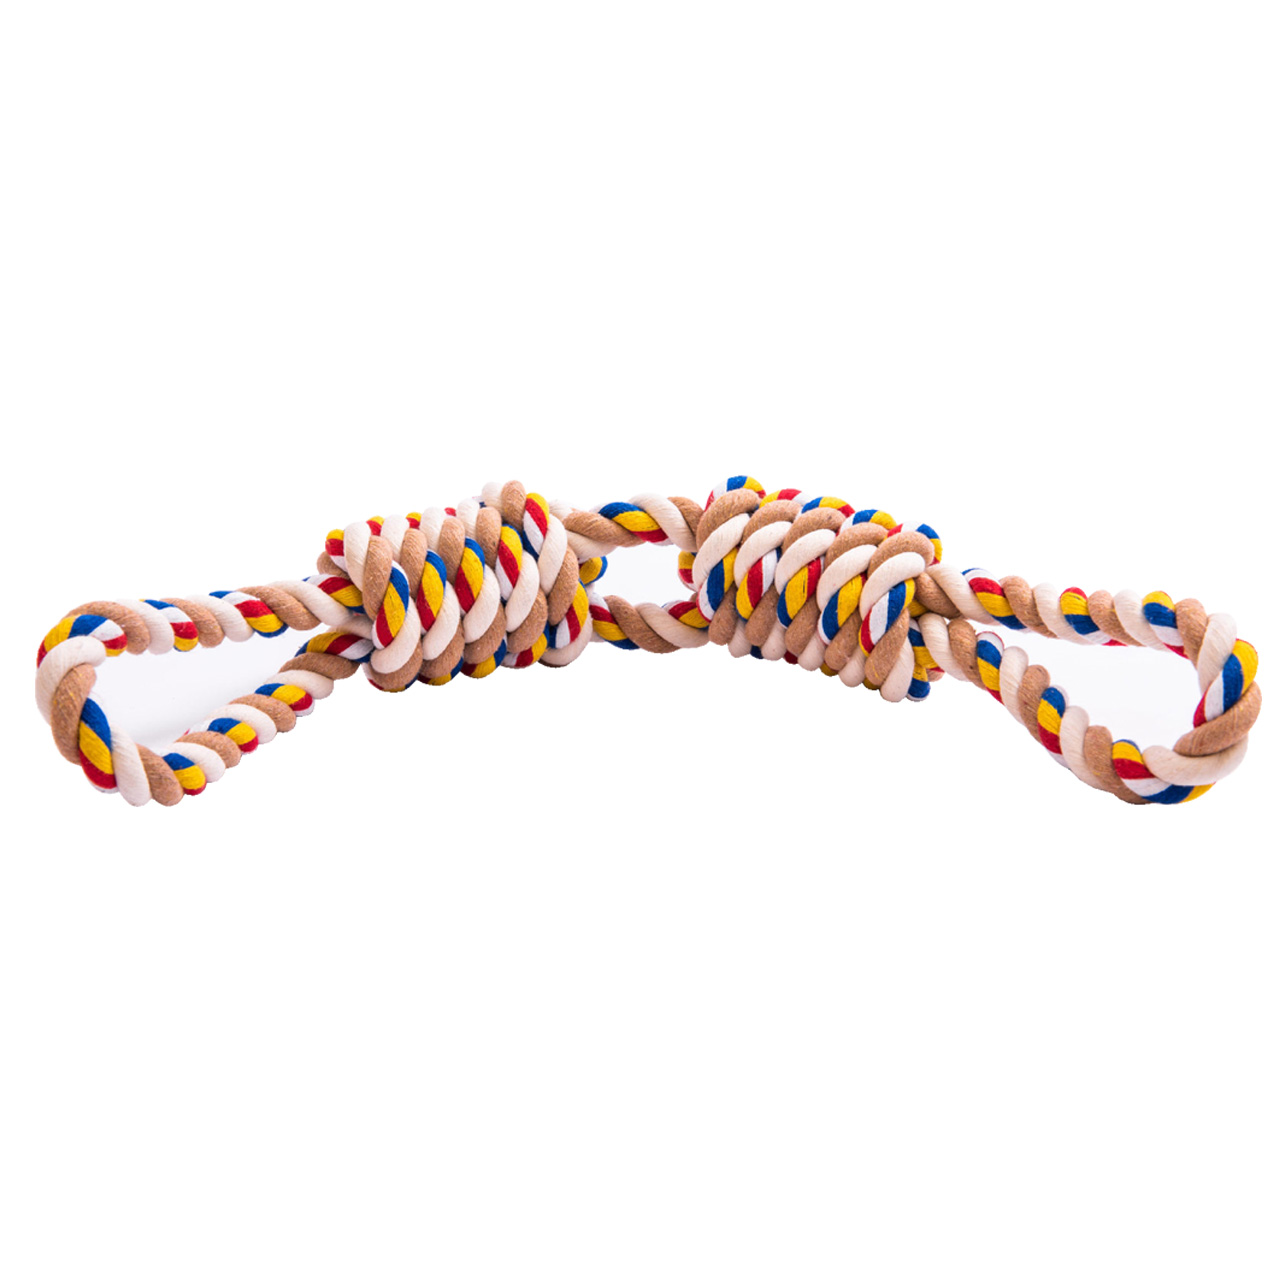 outside Funny Dog Toy Rope Uses High Quality Cotton Rope To Make Chewy Large Dog Playing And Training Dog Toy